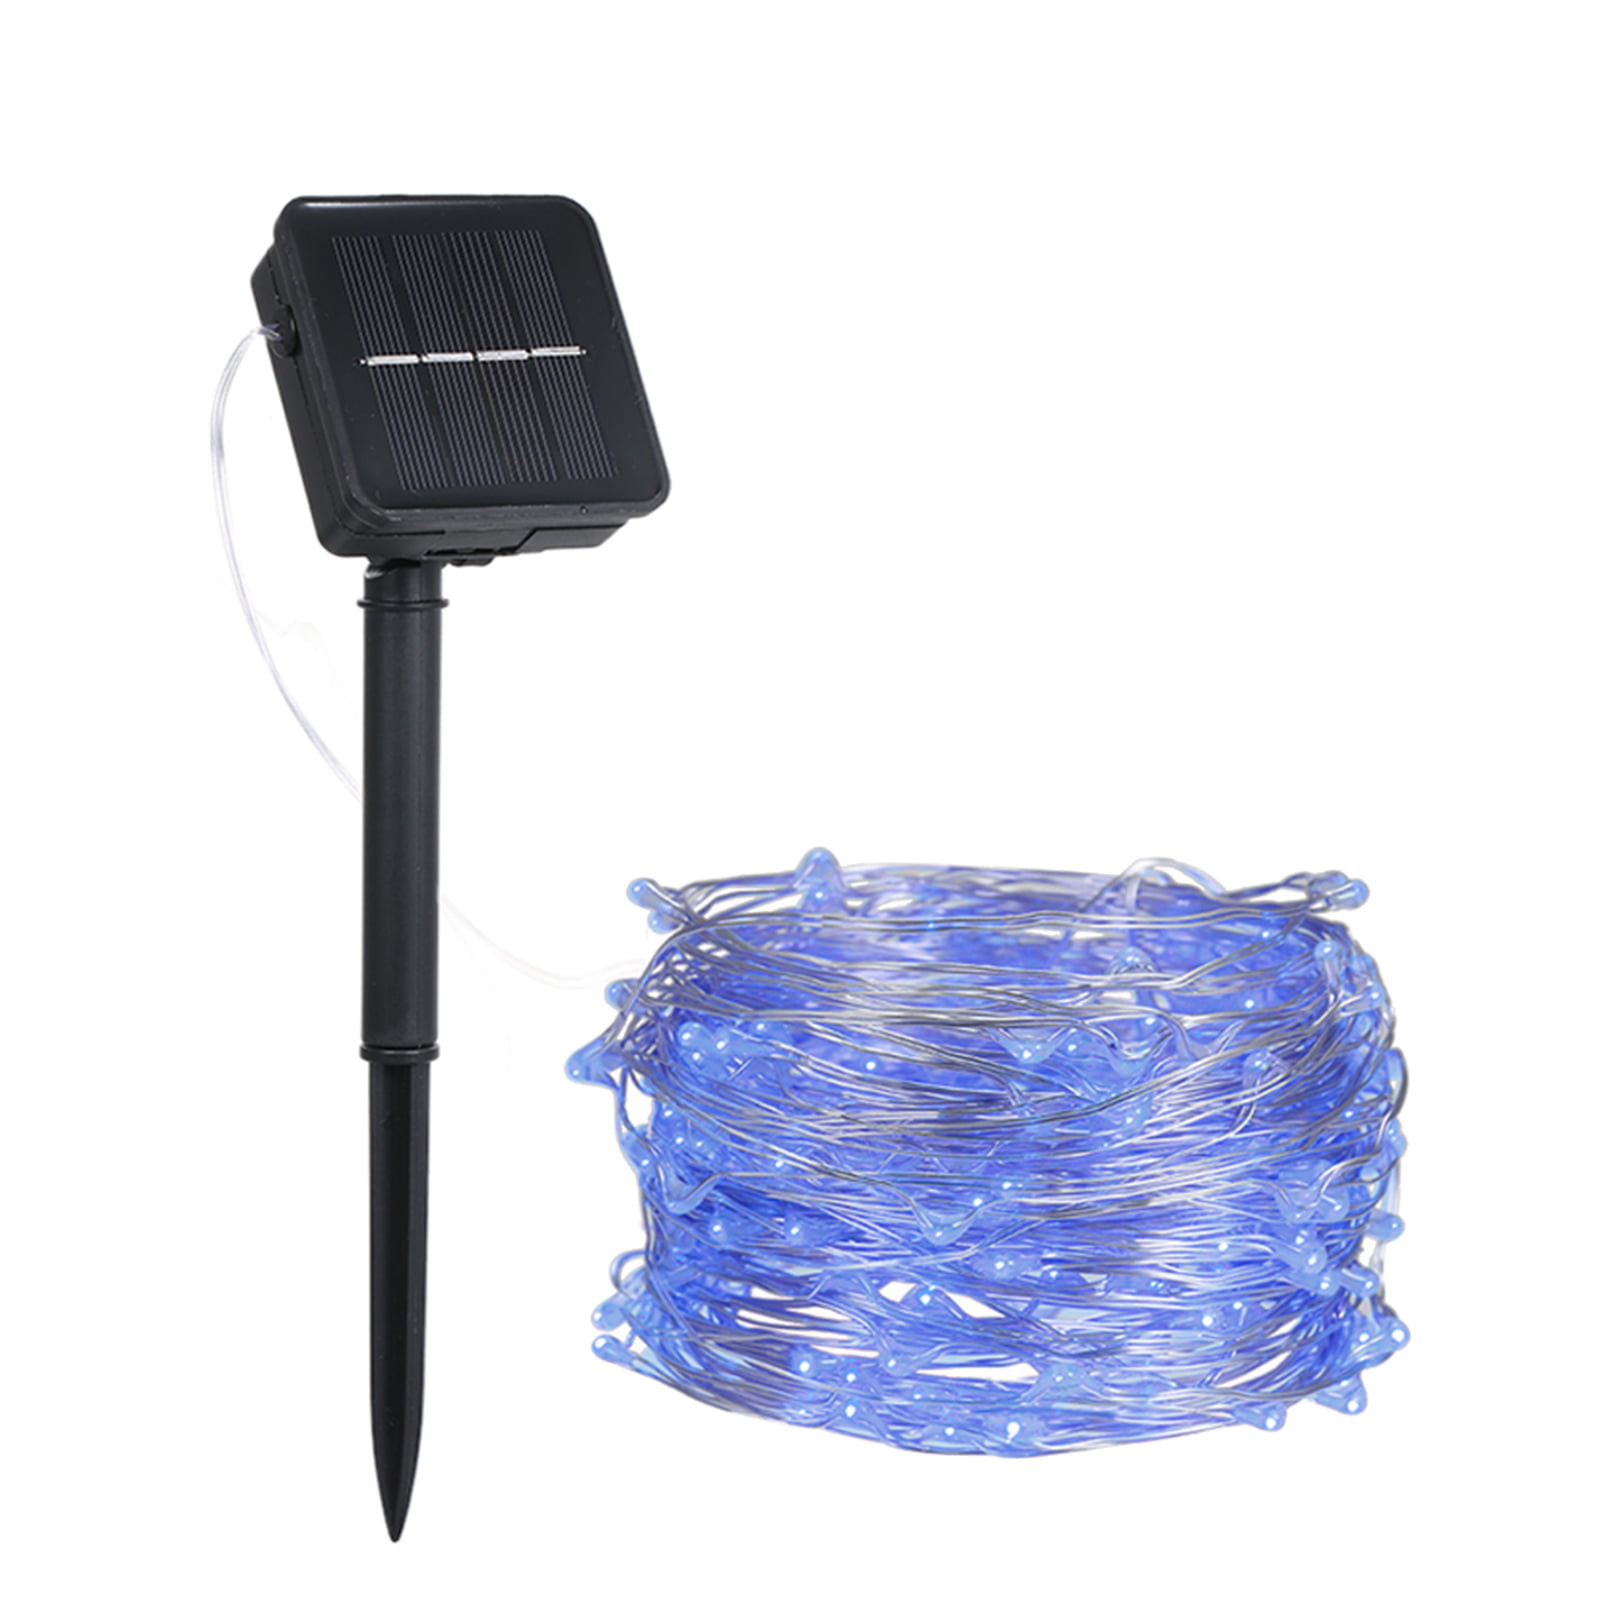 10M/100LEDS Lights Solar Powered Copper Wire String Fairy Waterproof Light Lamp 